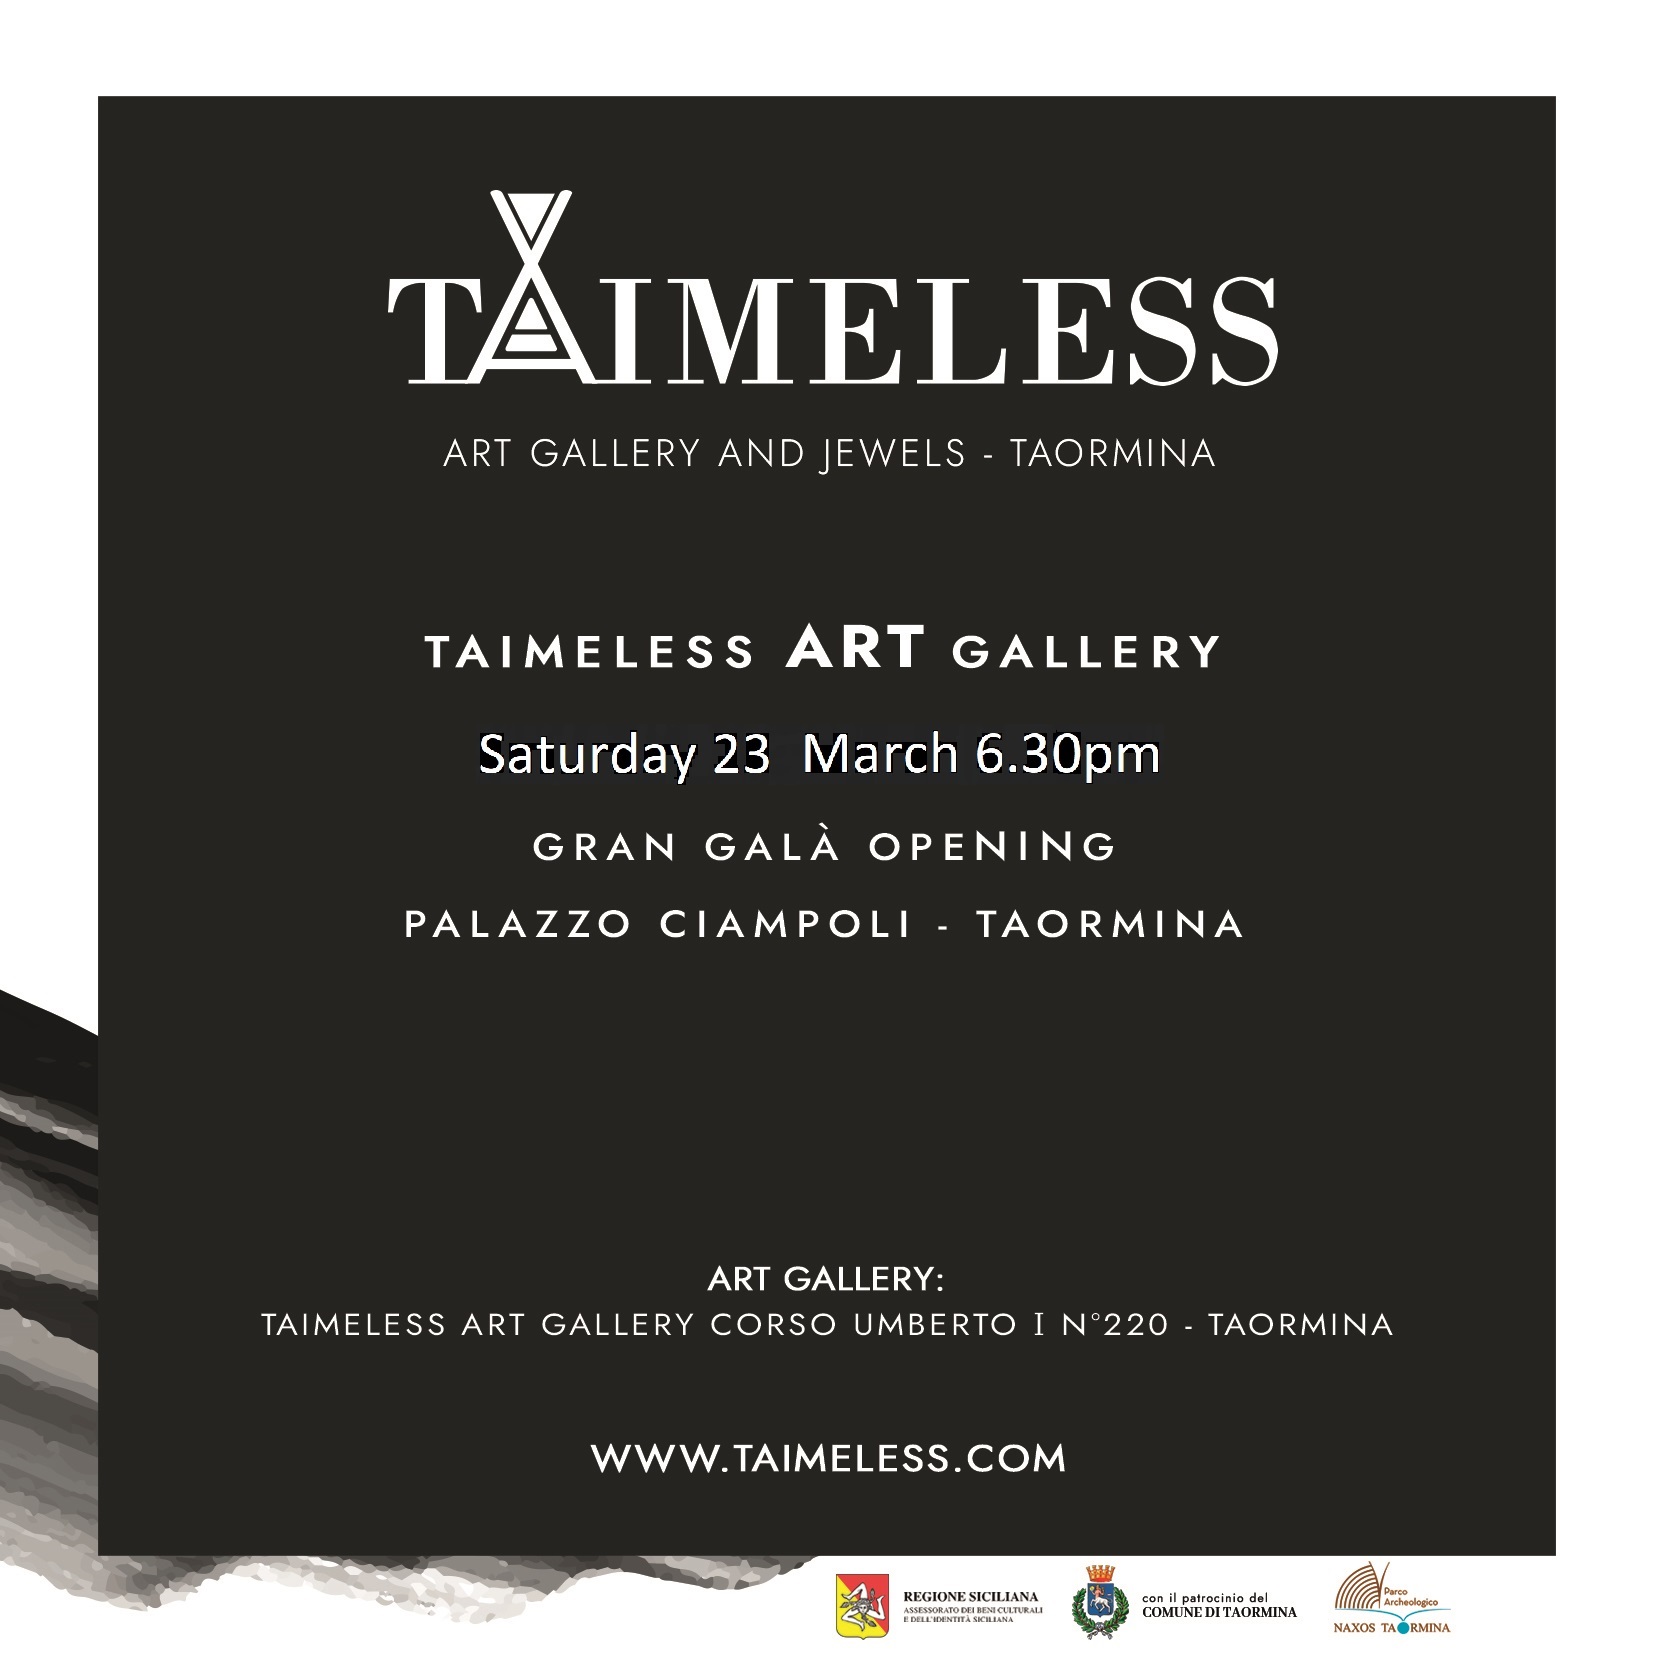 Taimeless: The Opening of a New Art Gallery in Taormina, Sicily